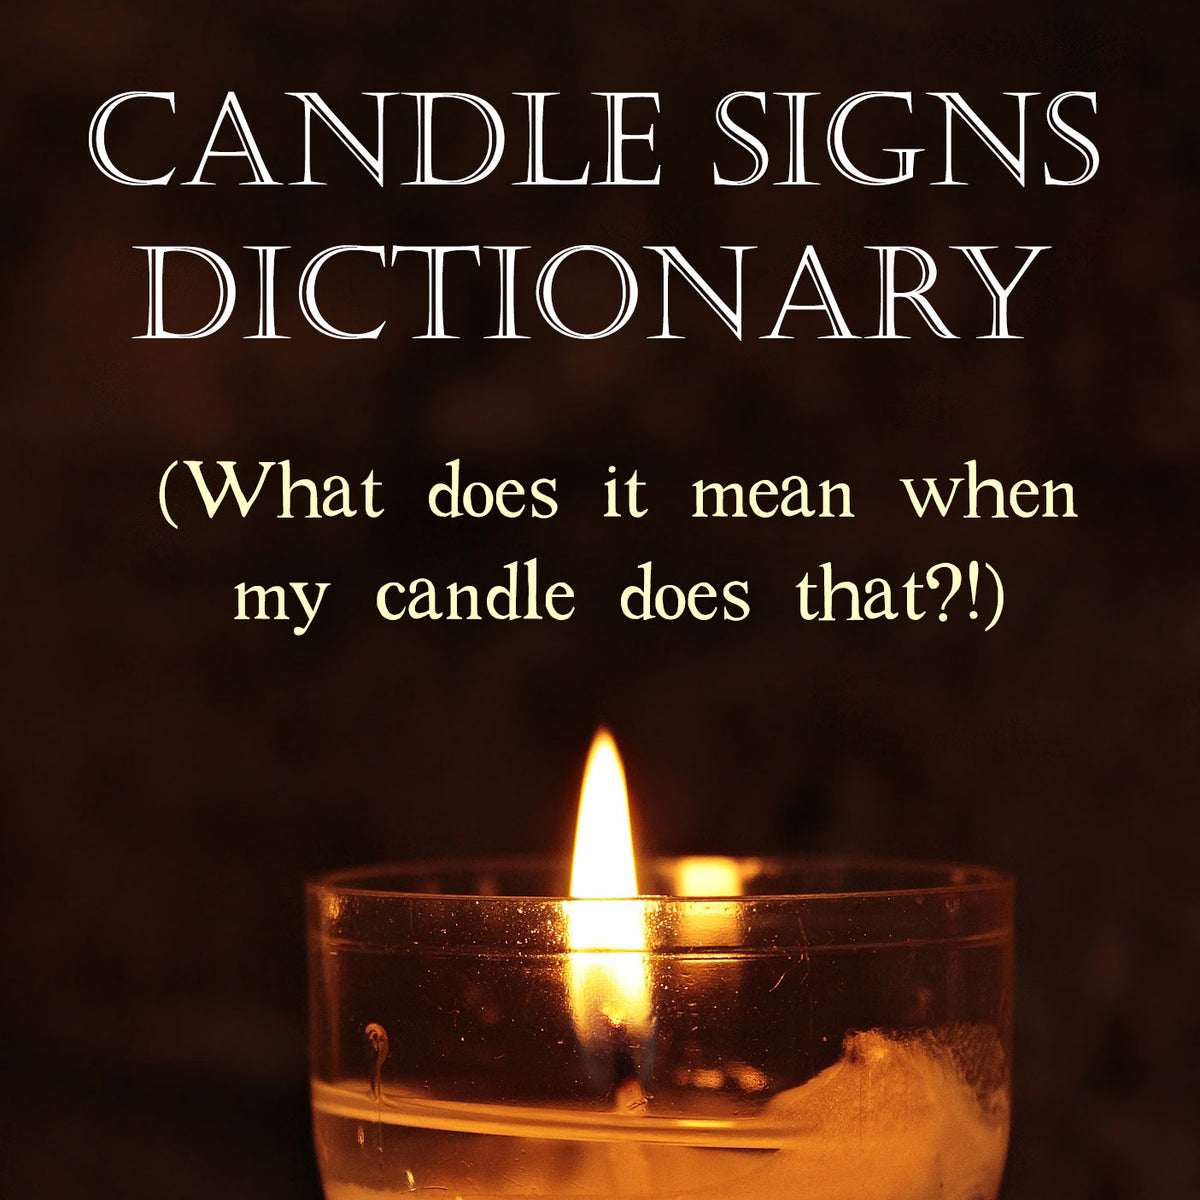 candle-wax-meaning